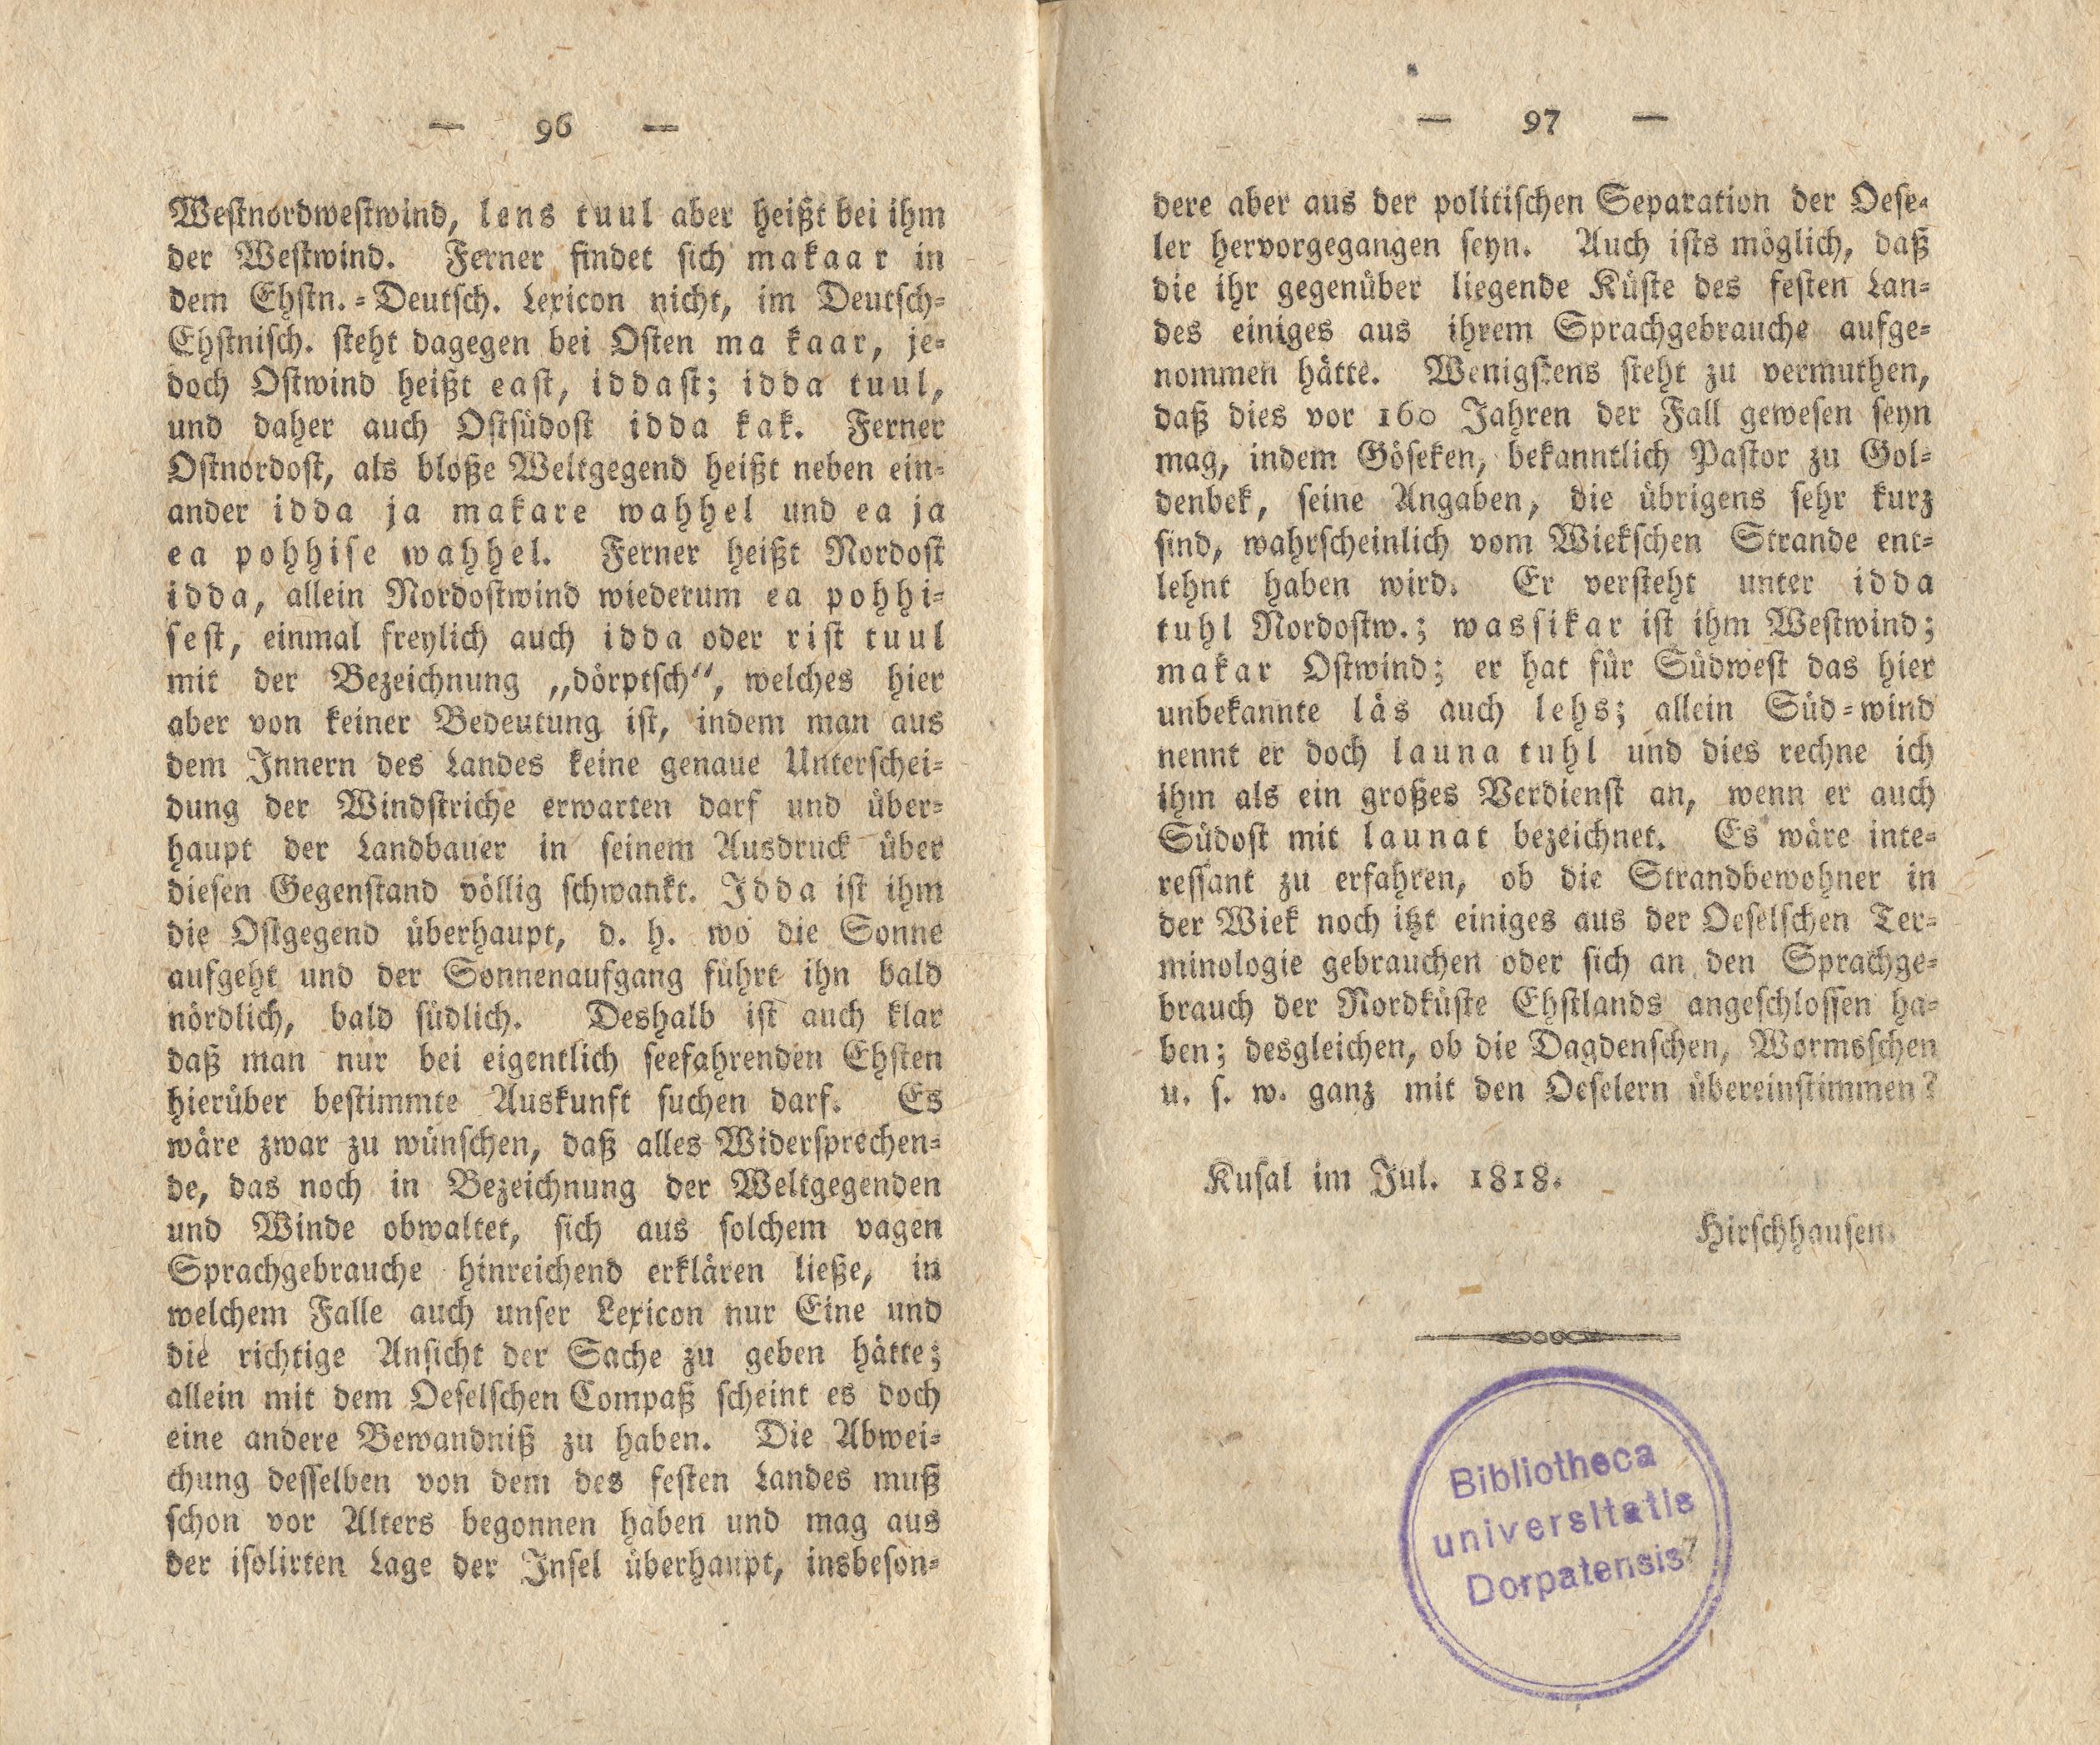 Beiträge [12] (1818) | 49. (96-97) Main body of text